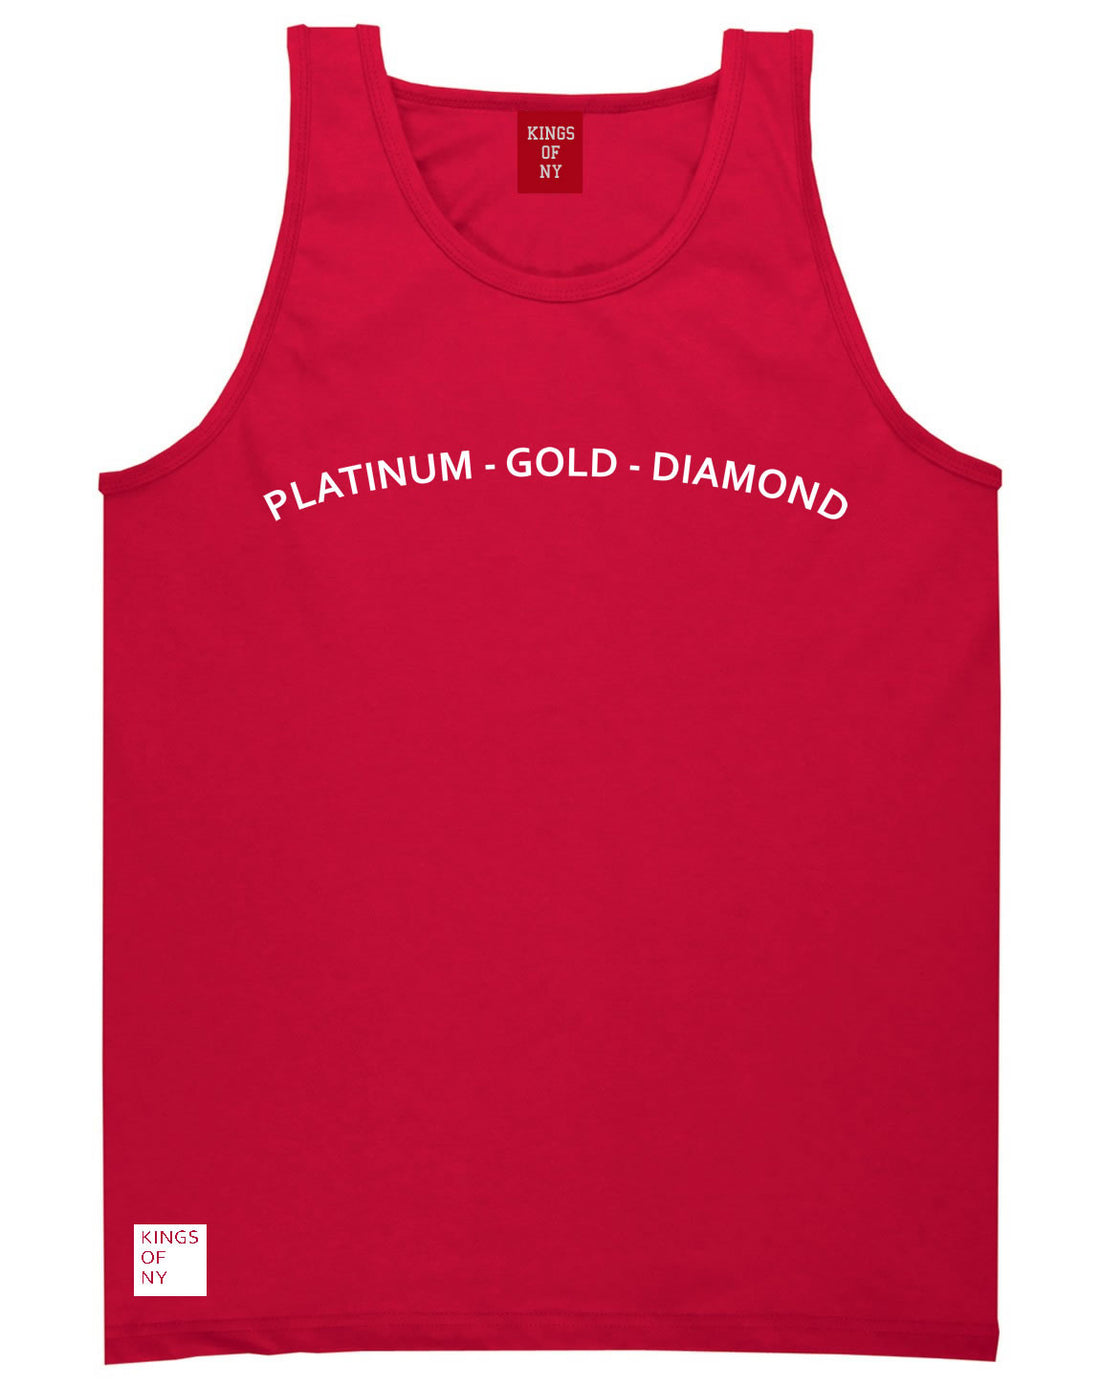 Platinum Gold Diamond Tank Top in Red by Kings Of NY